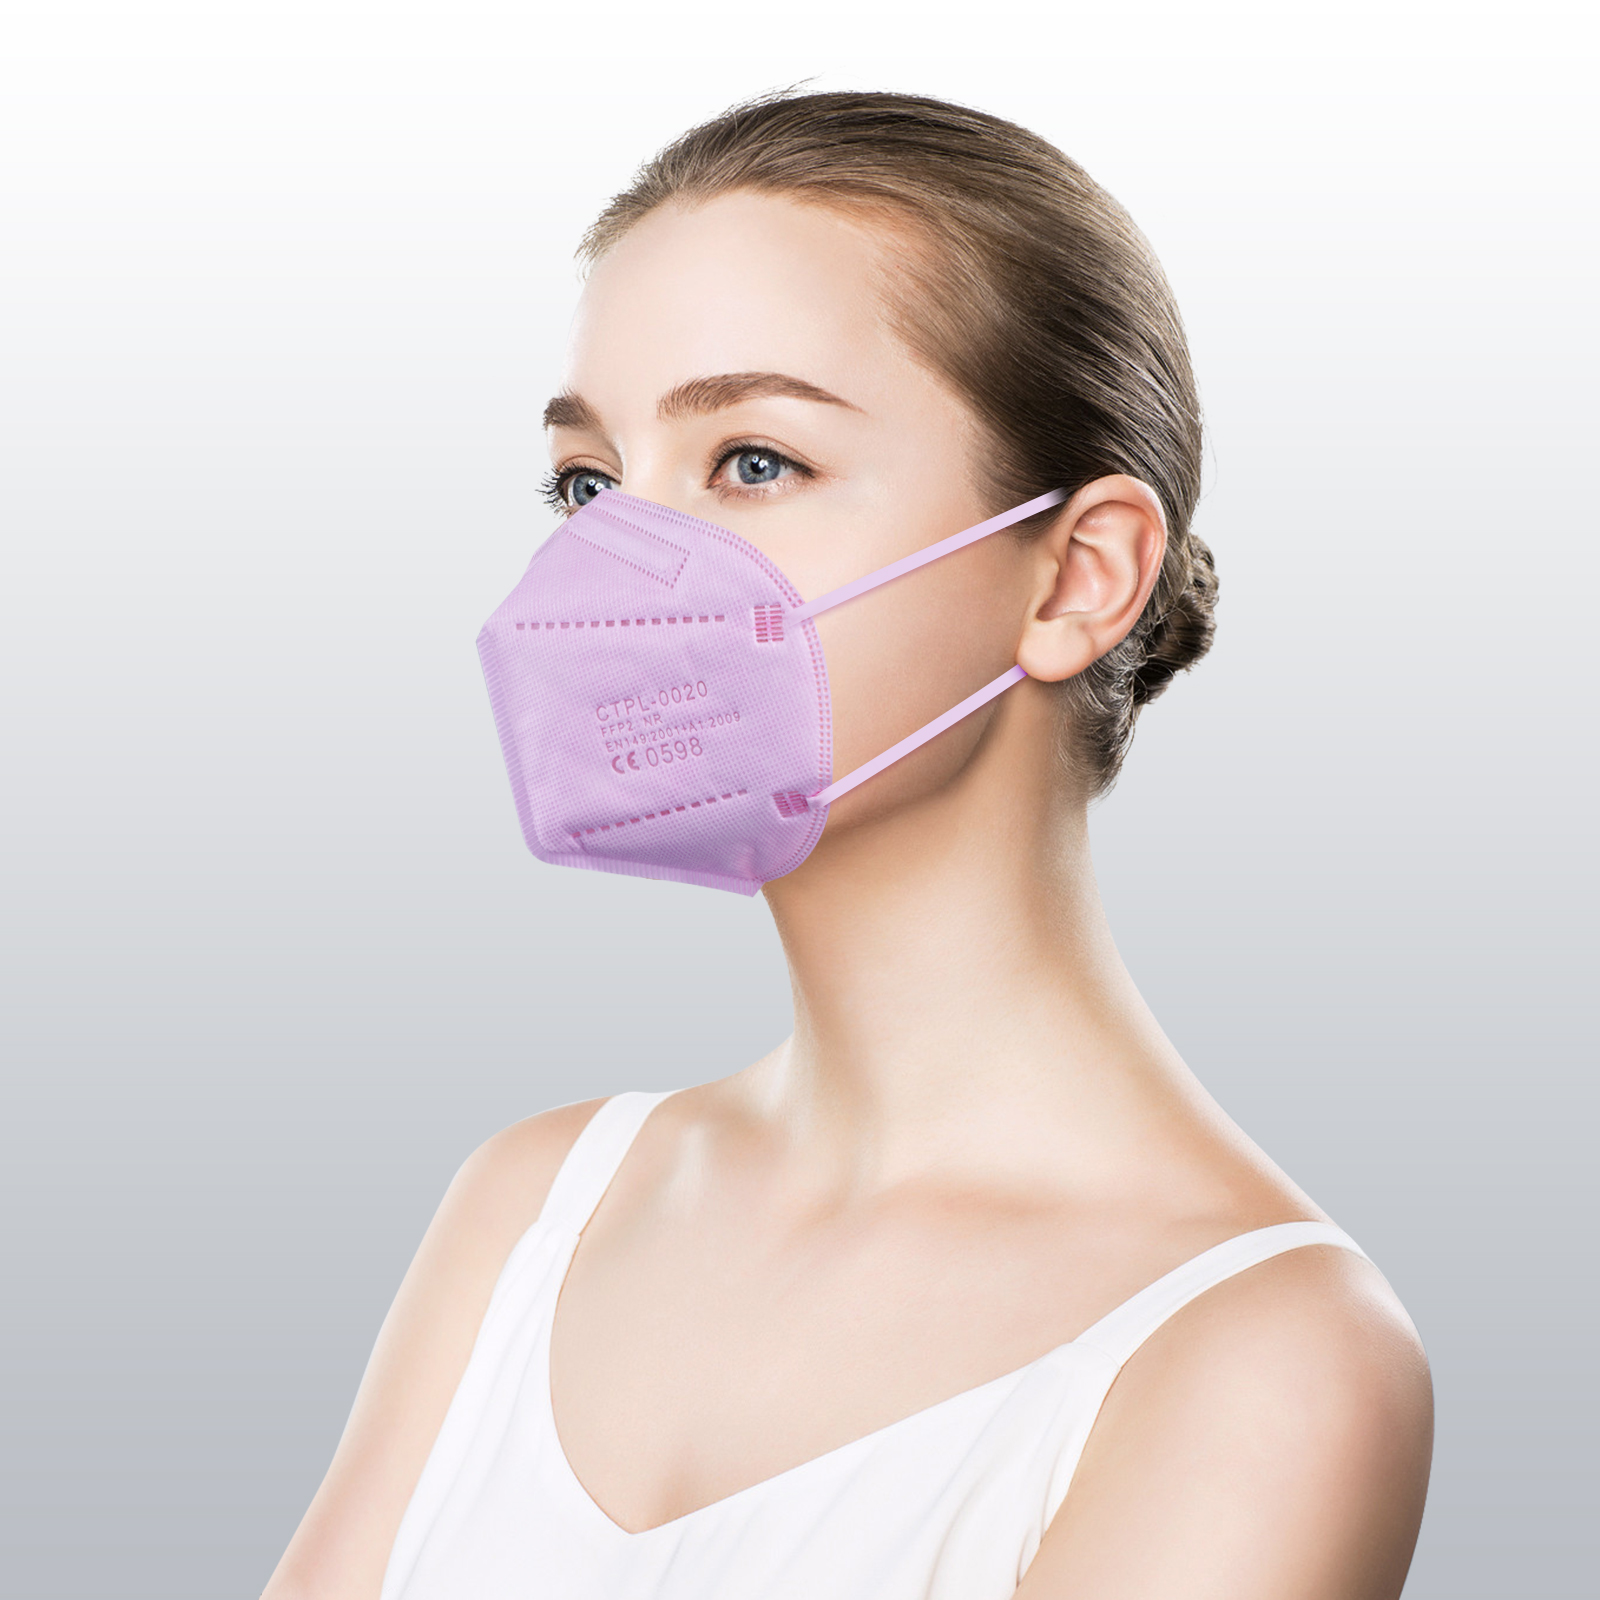 Is there a difference between KN95 and N95 masks?